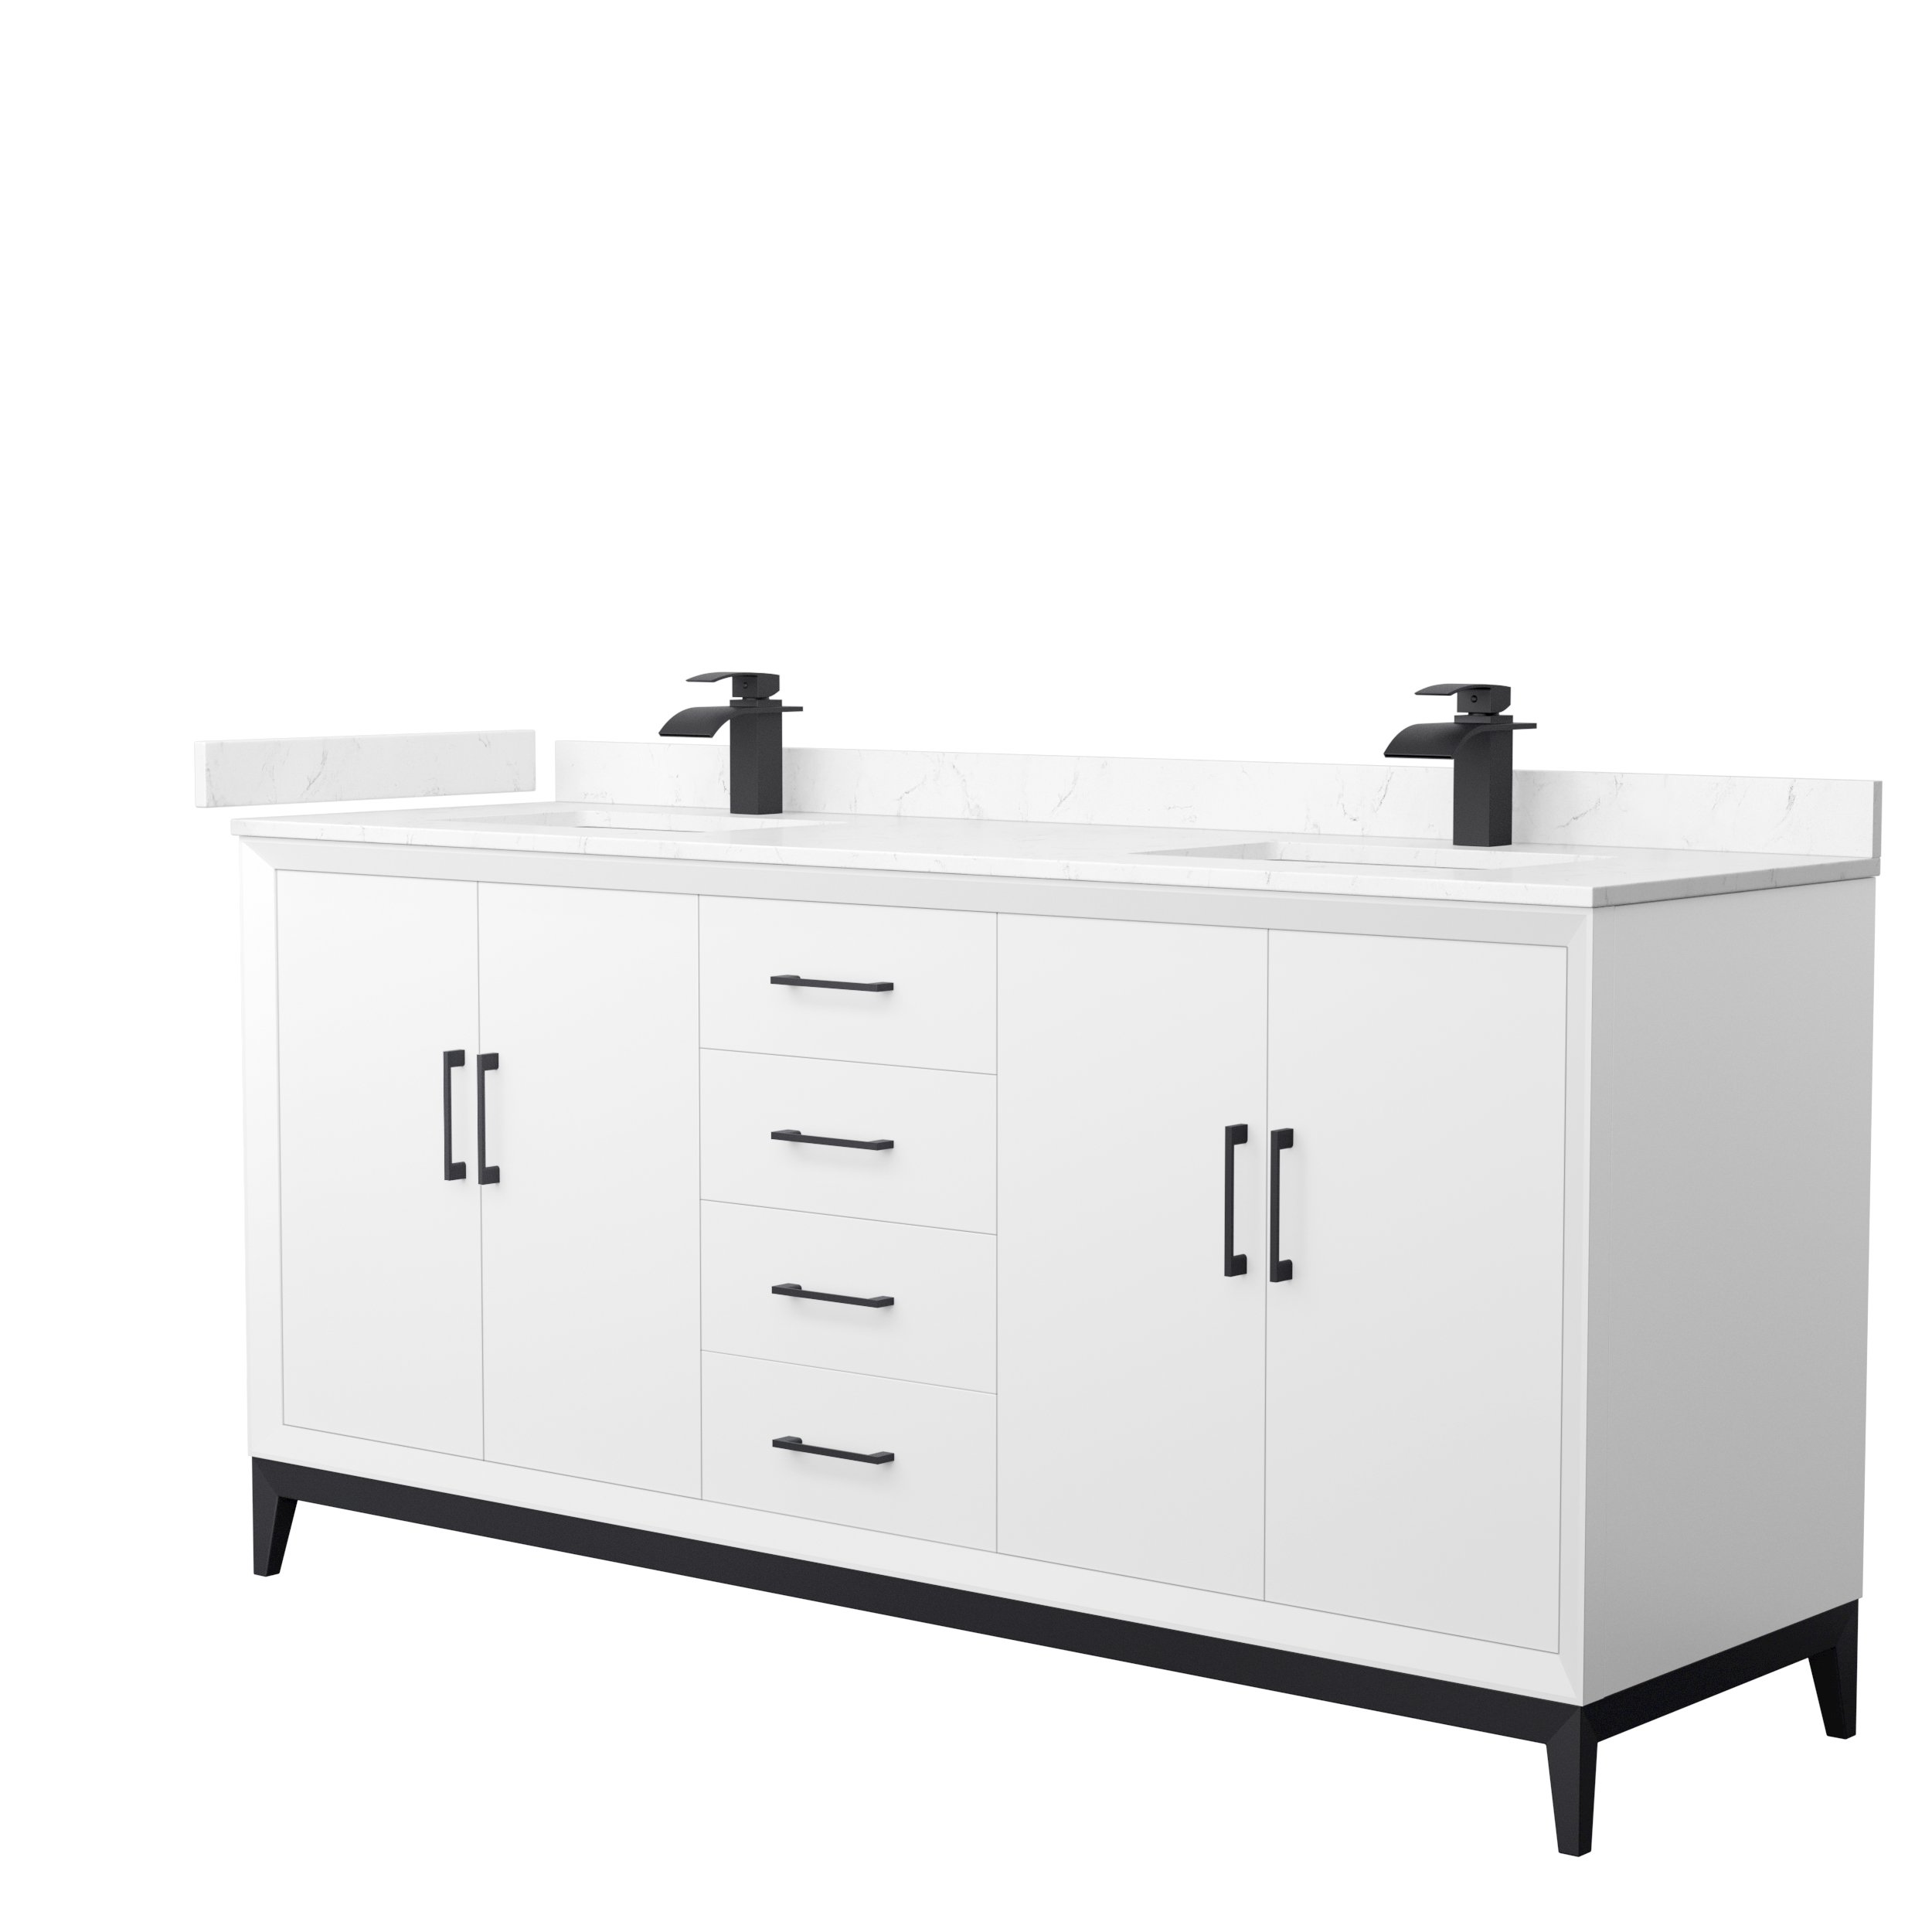 Amici 72" Double Vanity with optional Cultured Marble Counter - White WC-8181-72-DBL-VAN-WHT-